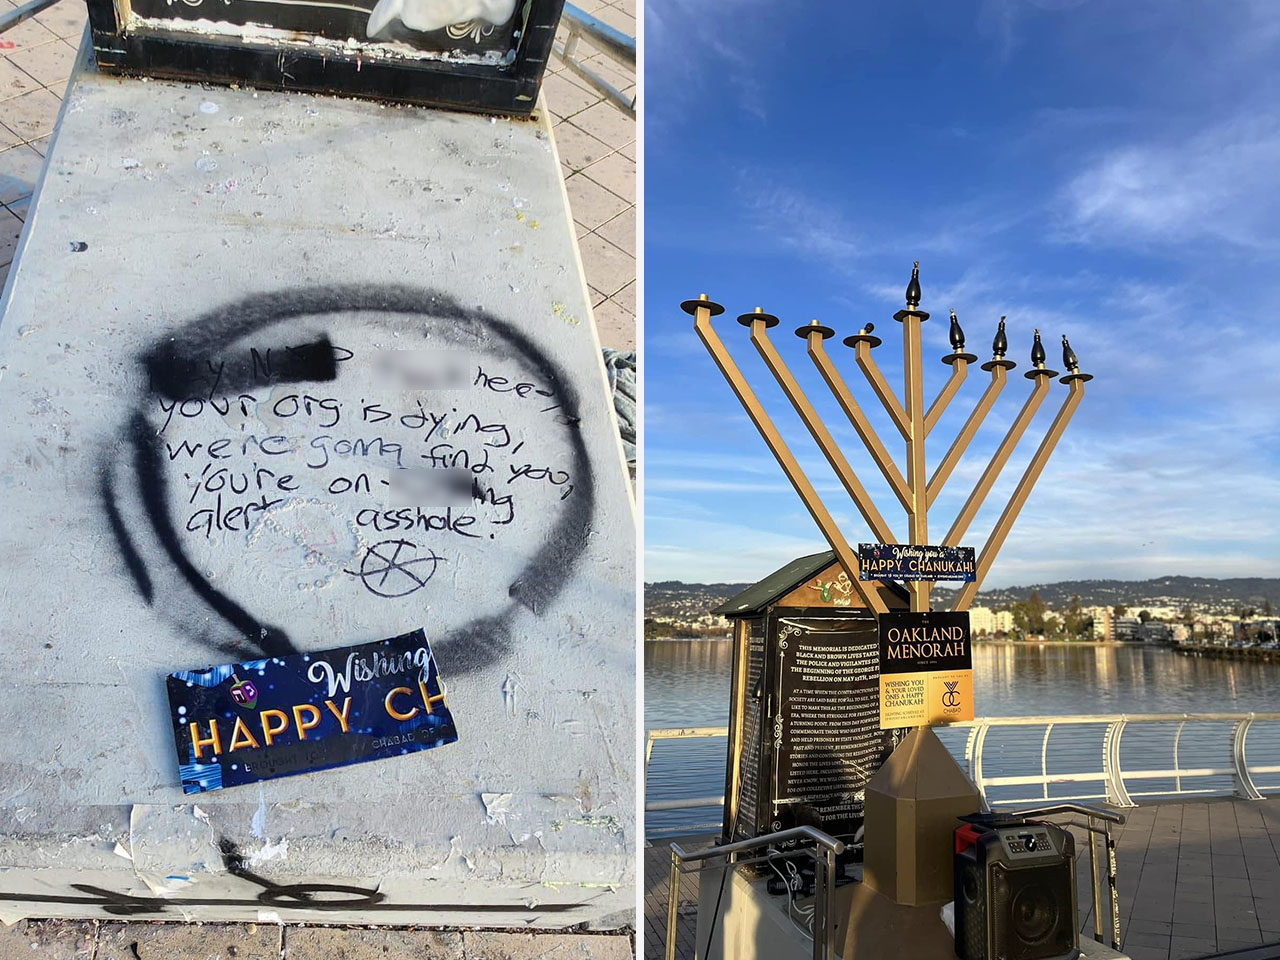 Chabad of Oakland's menorah at Lake Merritt on Dec. 10, before it was vandalized (right) and graffiti left where the menorah stood before it was pulled down. (Photos/Courtesy Chabad of Oakland)